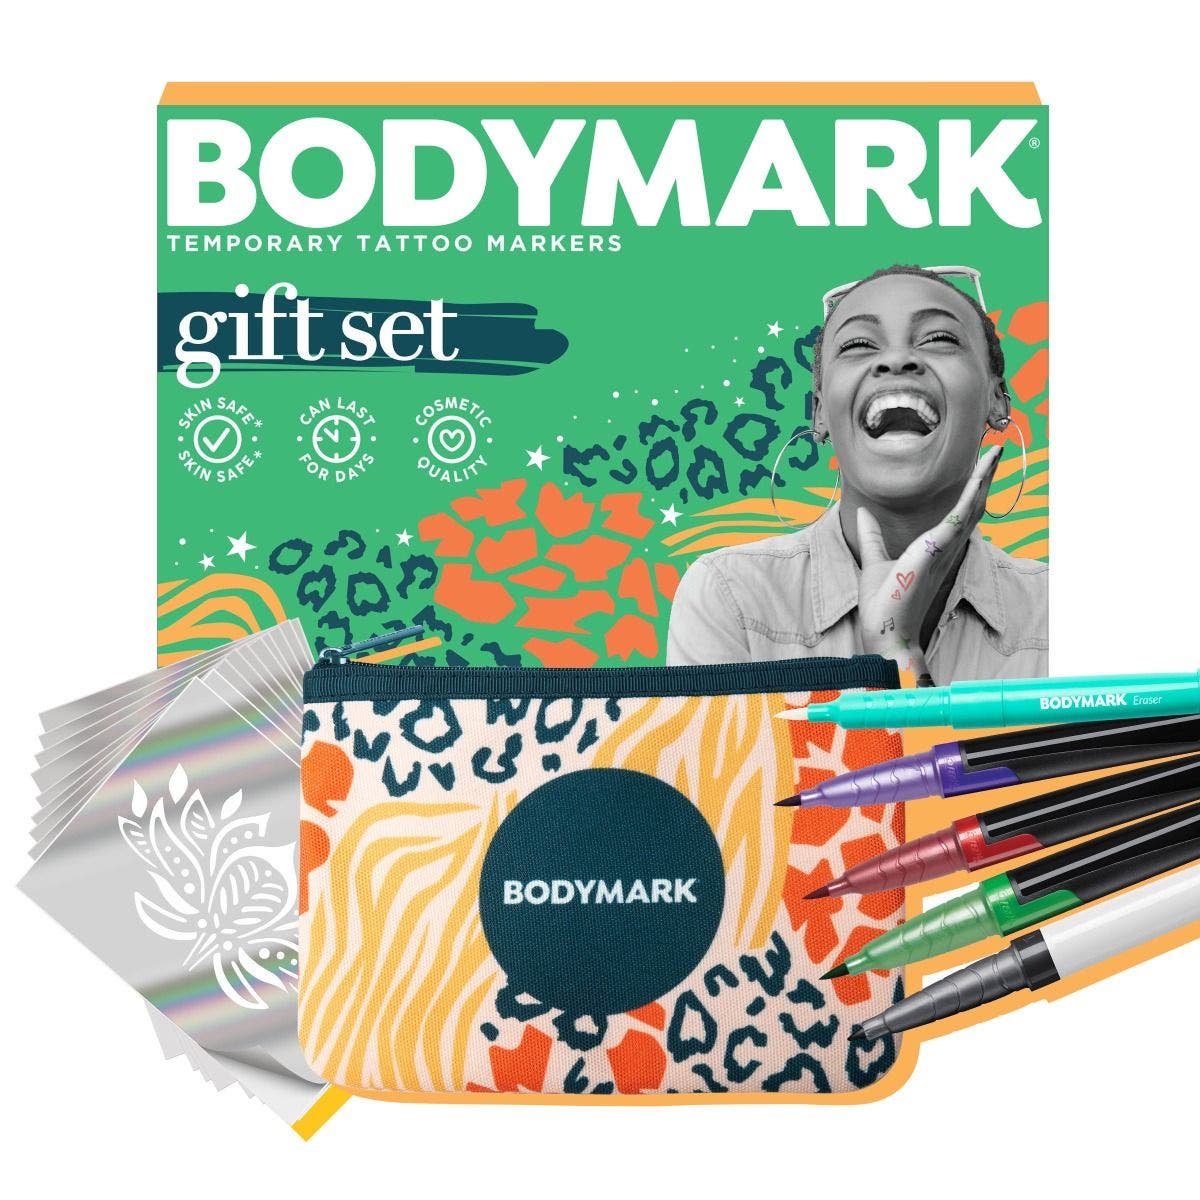  BodyMark Gift Set Temporary Tattoo Marker for Skin, Premium  Brush Tip, 4 Count Pack of Assorted Colors and Stencils, Skin-Safe  Temporary Tattoo Markers Set : Beauty & Personal Care